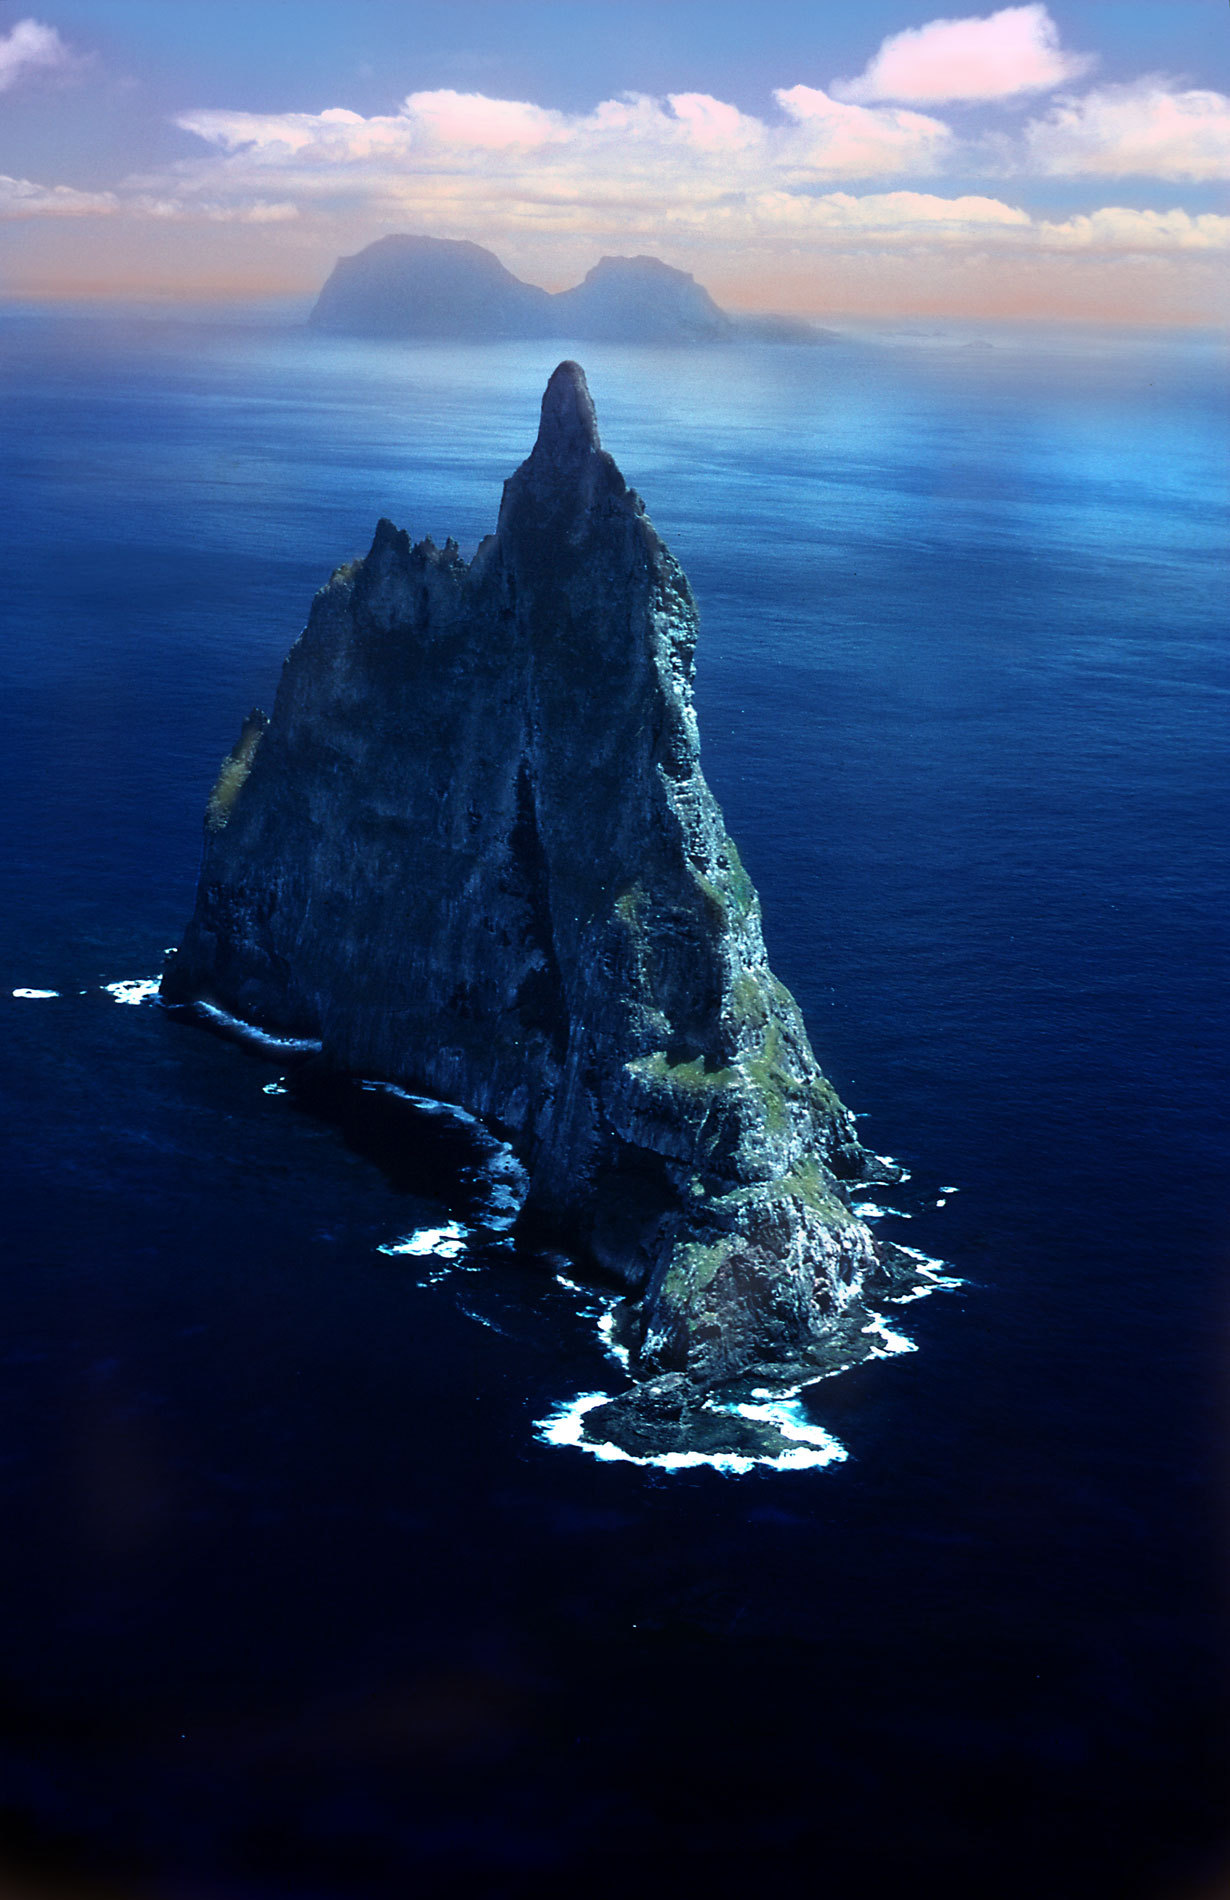 Rising from the depths (Ball’s Pyramid, off the east coast of Australia, at 562